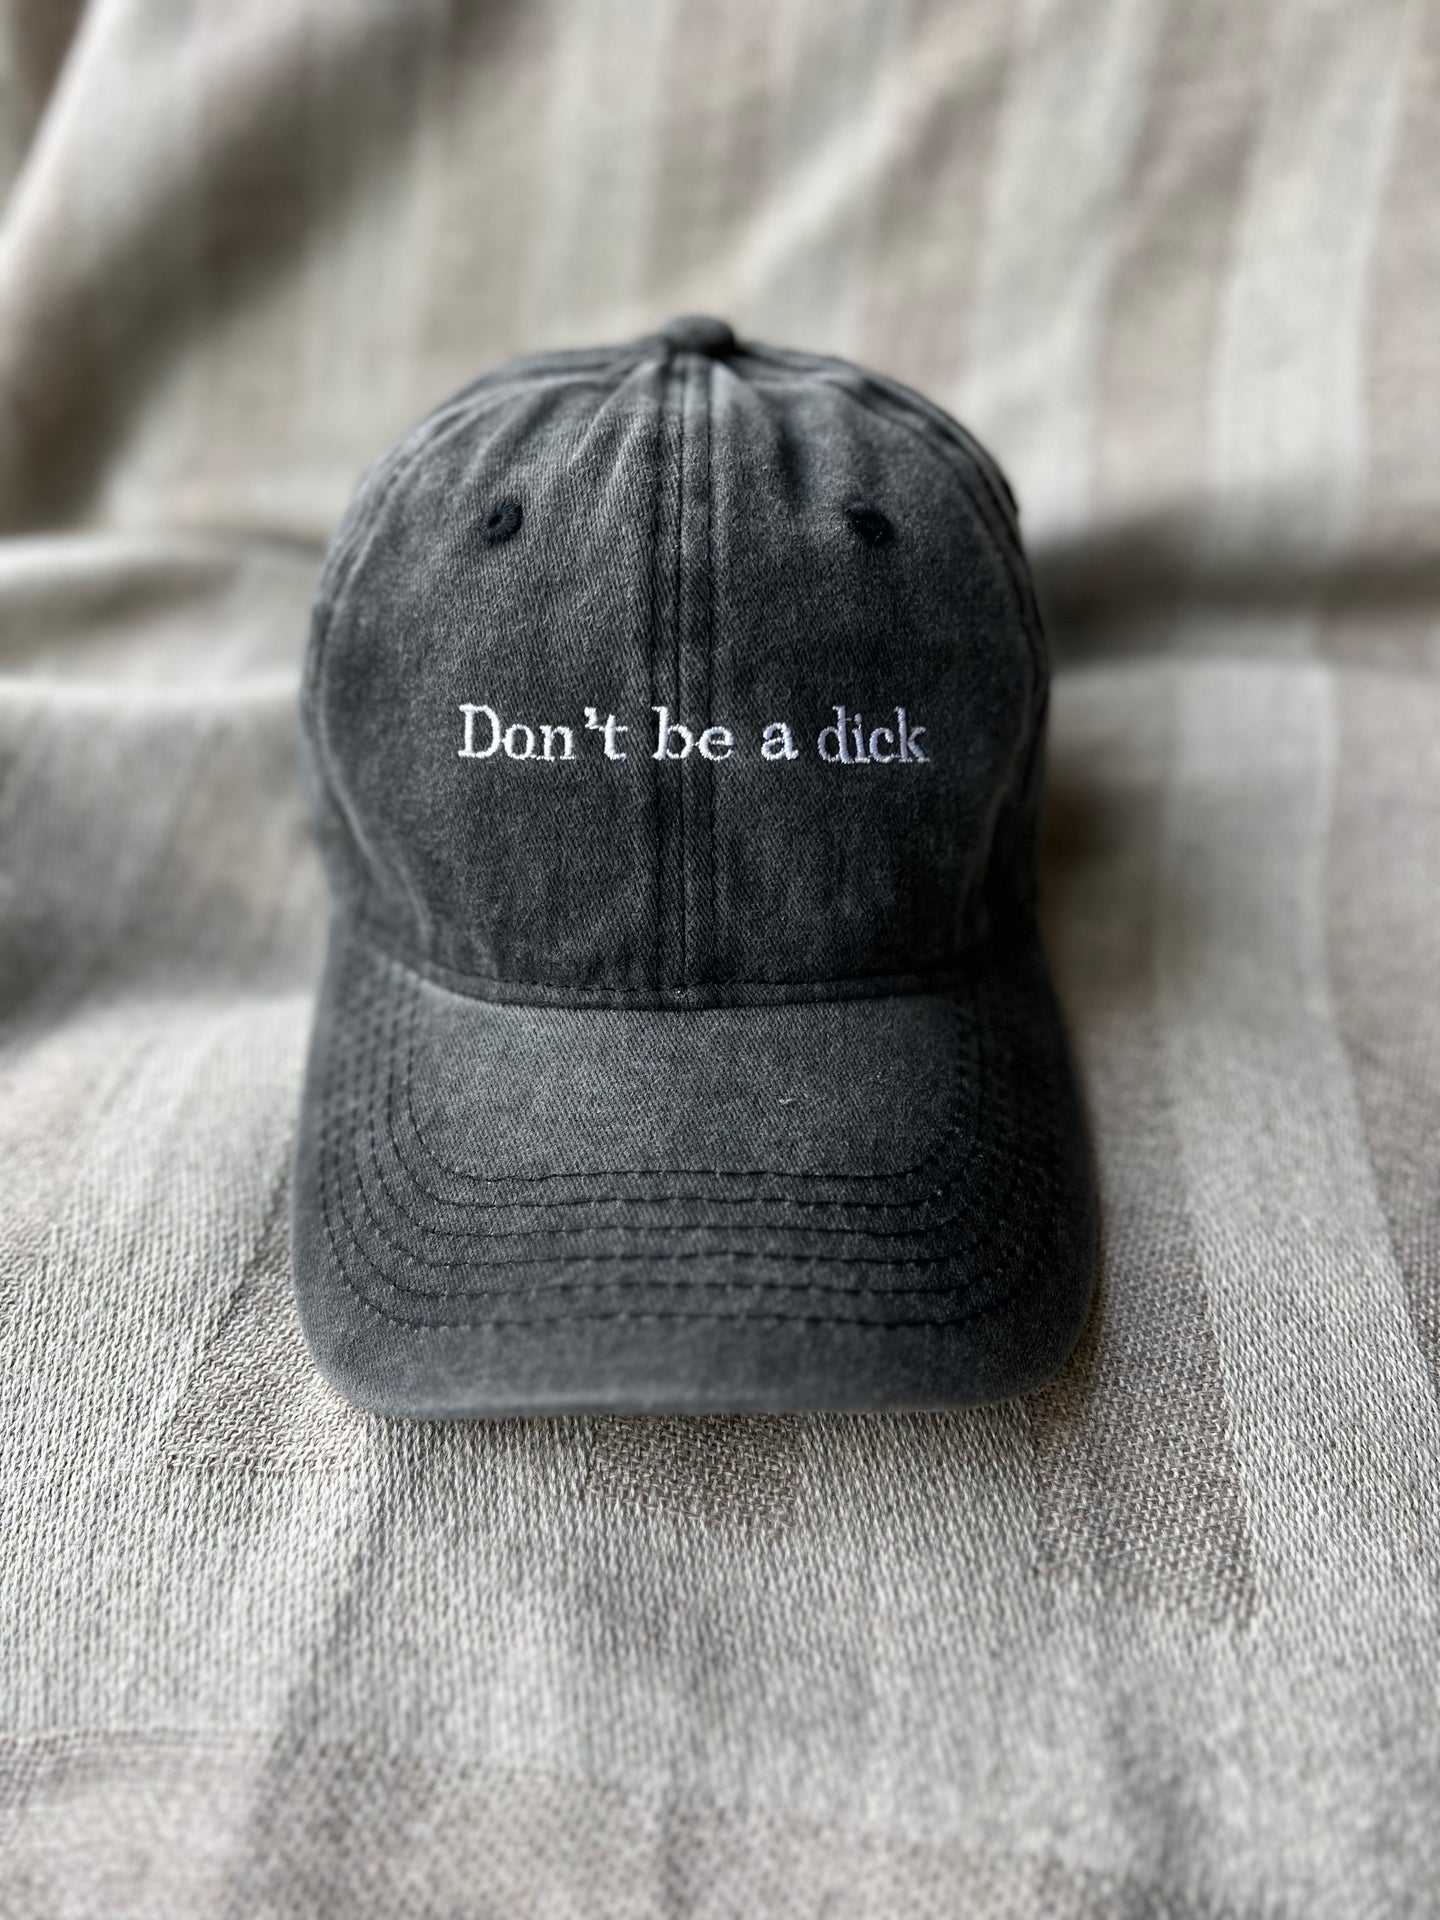 Don’t be a dick